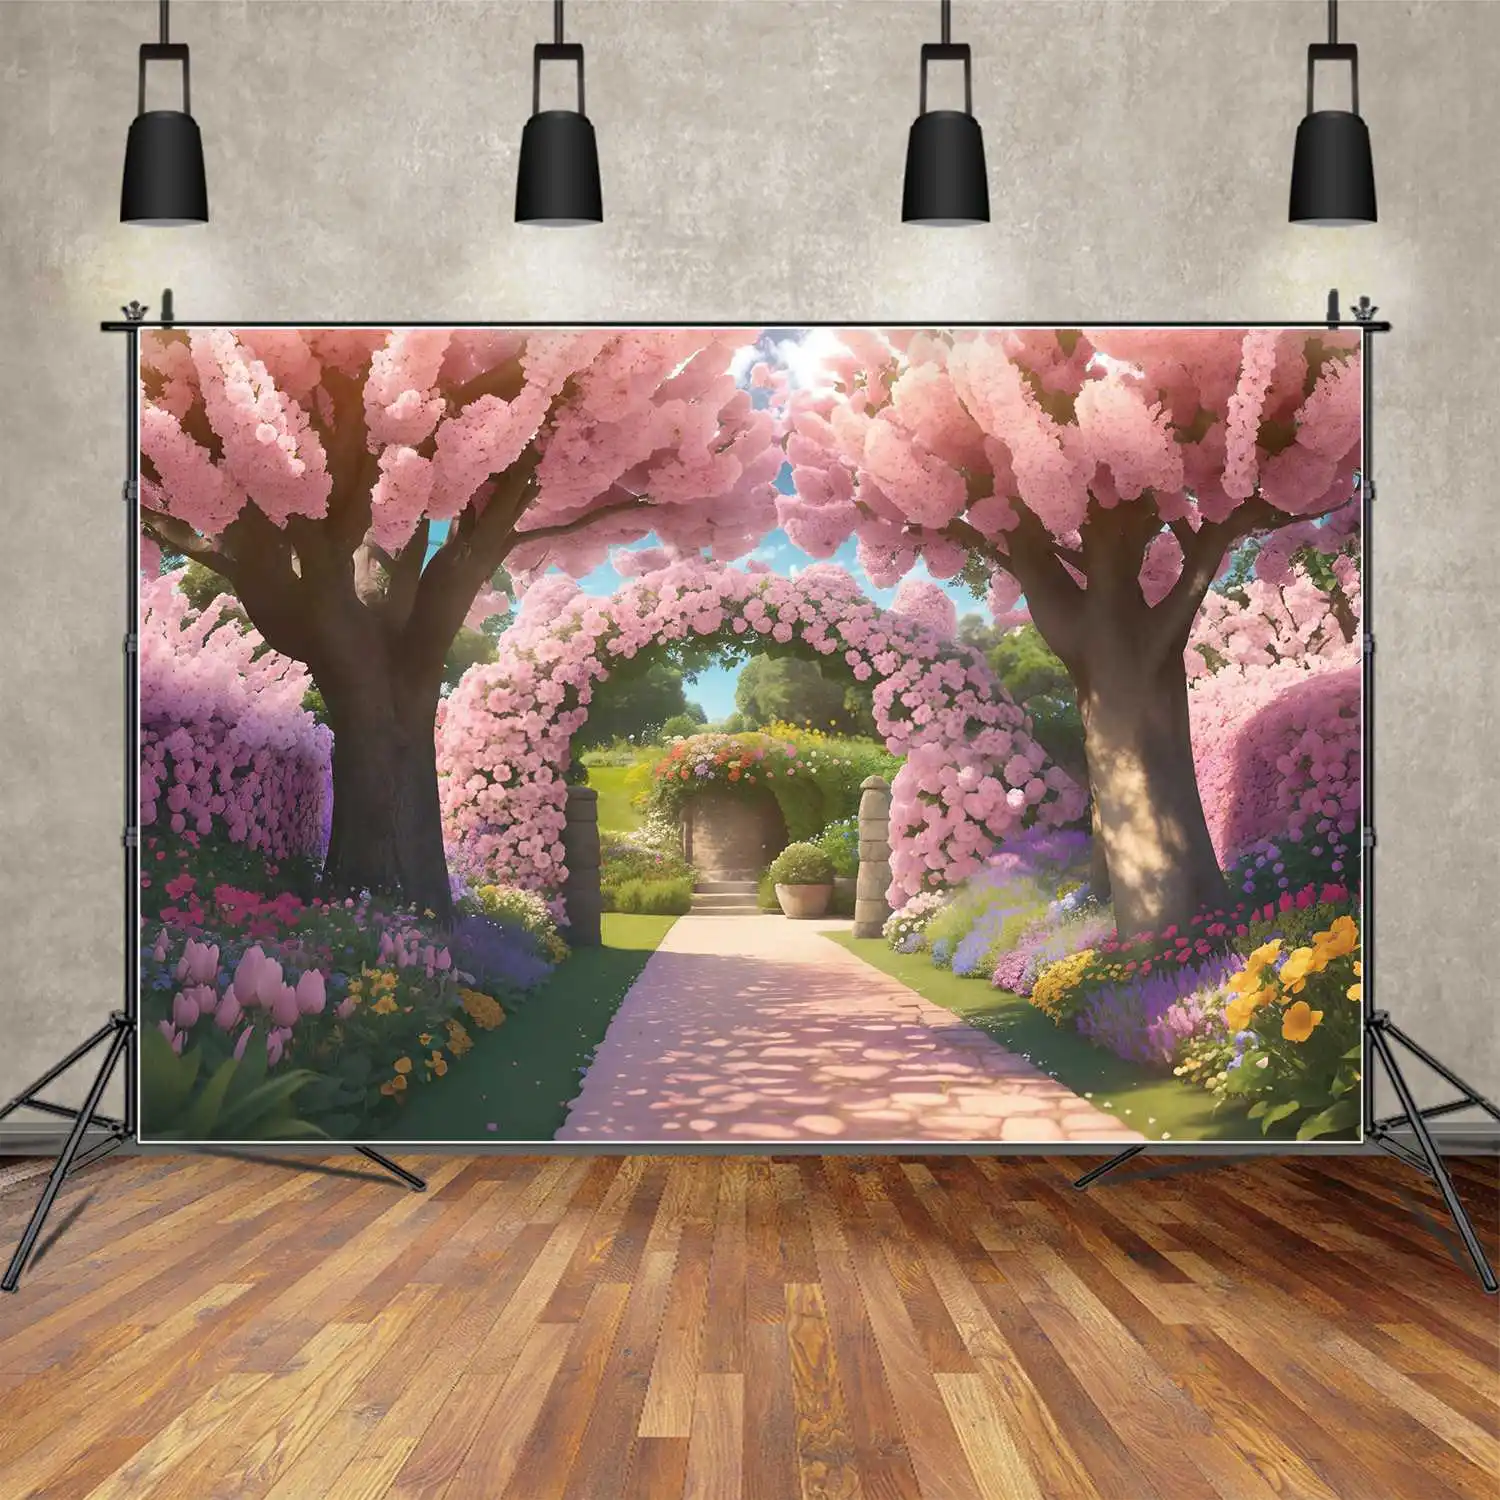 

Children Flowers Birthday Wall Backdrops Photography Decor Pink Blossom Custom Baby Photo Booth Photographic Backgrounds